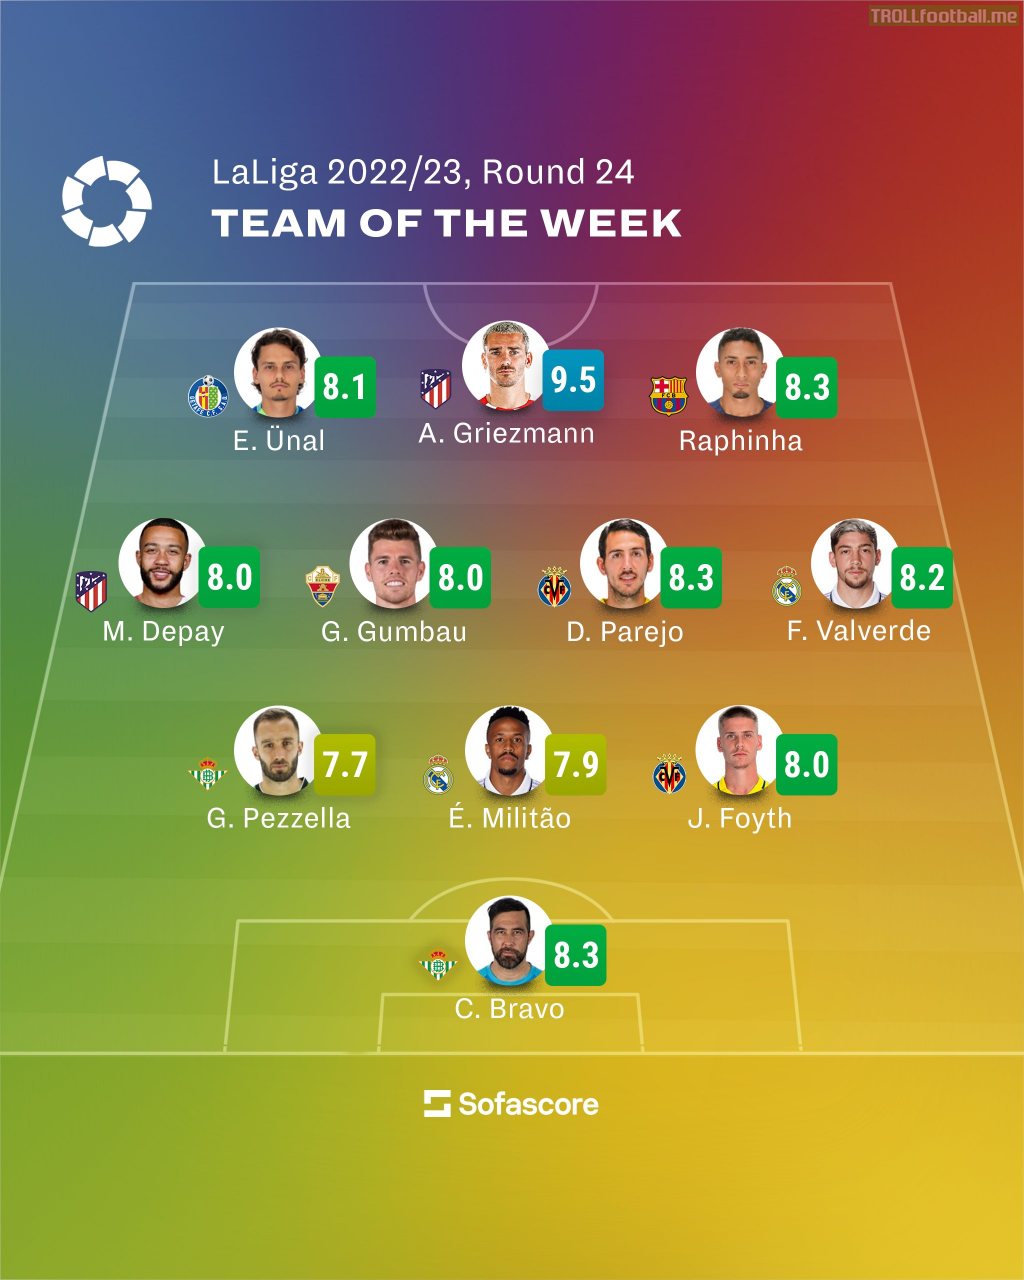 LaLiga Team of the Week, Matchday 24